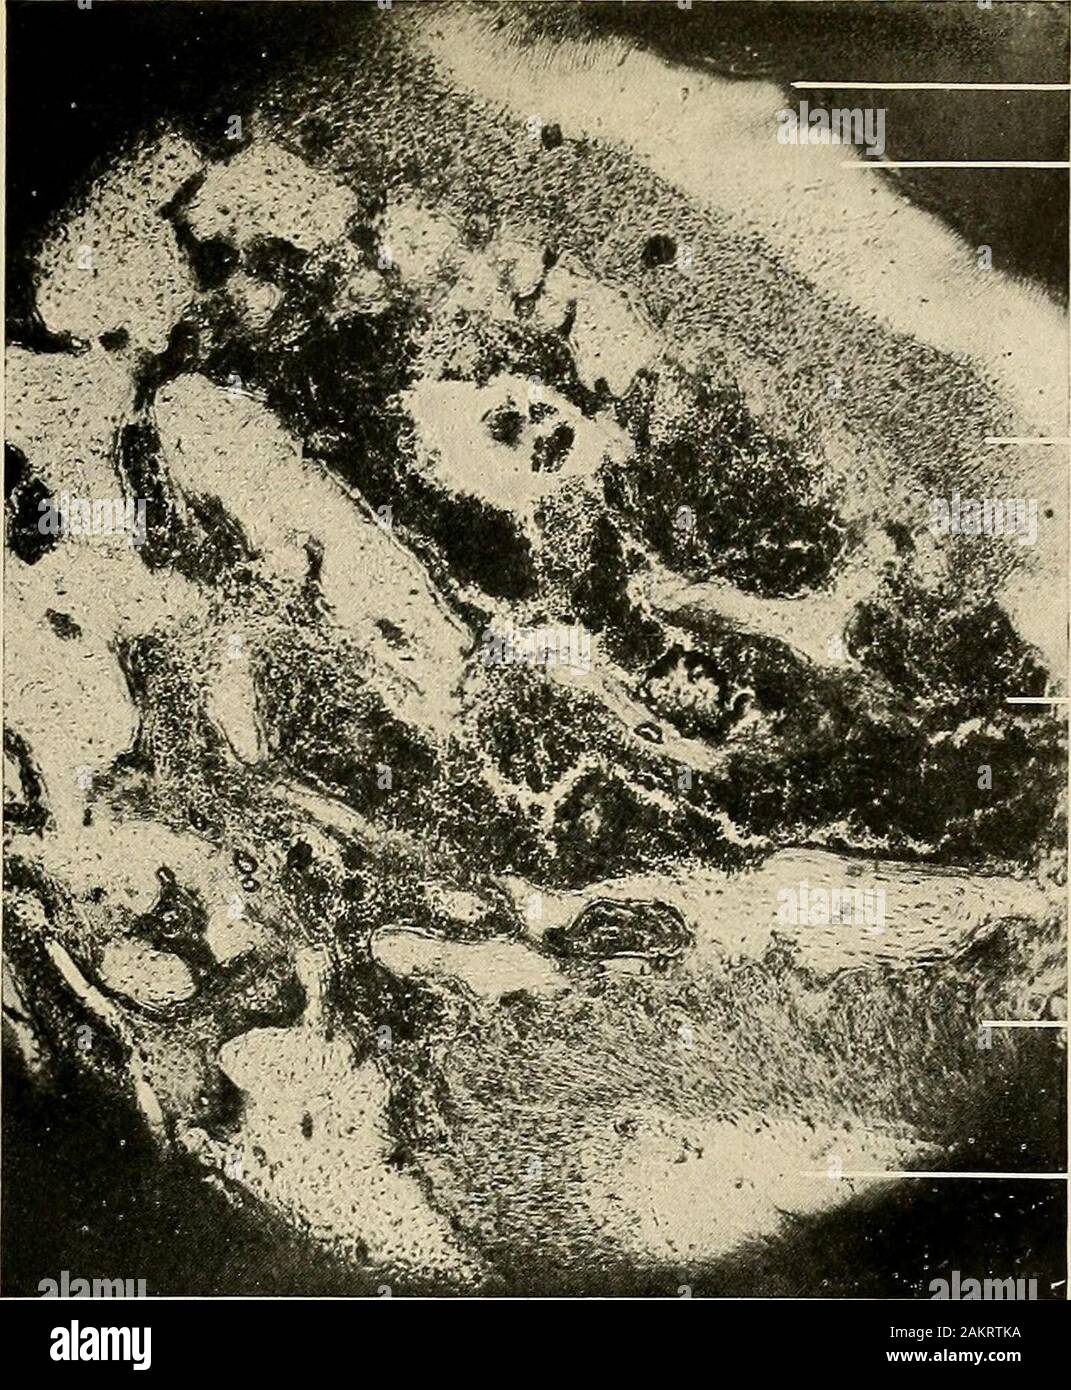 Principles and practice of operative dentistry . Fig. 200.—Section of peridental membrane, showing epithelial bodies or glandular structures. (F. B. Noyes.)X 900. -D, dentin; C, cementum; C&, cementoblasts; E, epithelial bodies ; F, white fibres.. Mucous membrane GUBl Periosteum Alveolar process Pericementum Cementum Fig. 201.—Transverse section of the jaw through the mucous membrane, gum, and alveolar process. (V. A. Latham.) X 60. Mucous membrane and epithelium Stock Photo